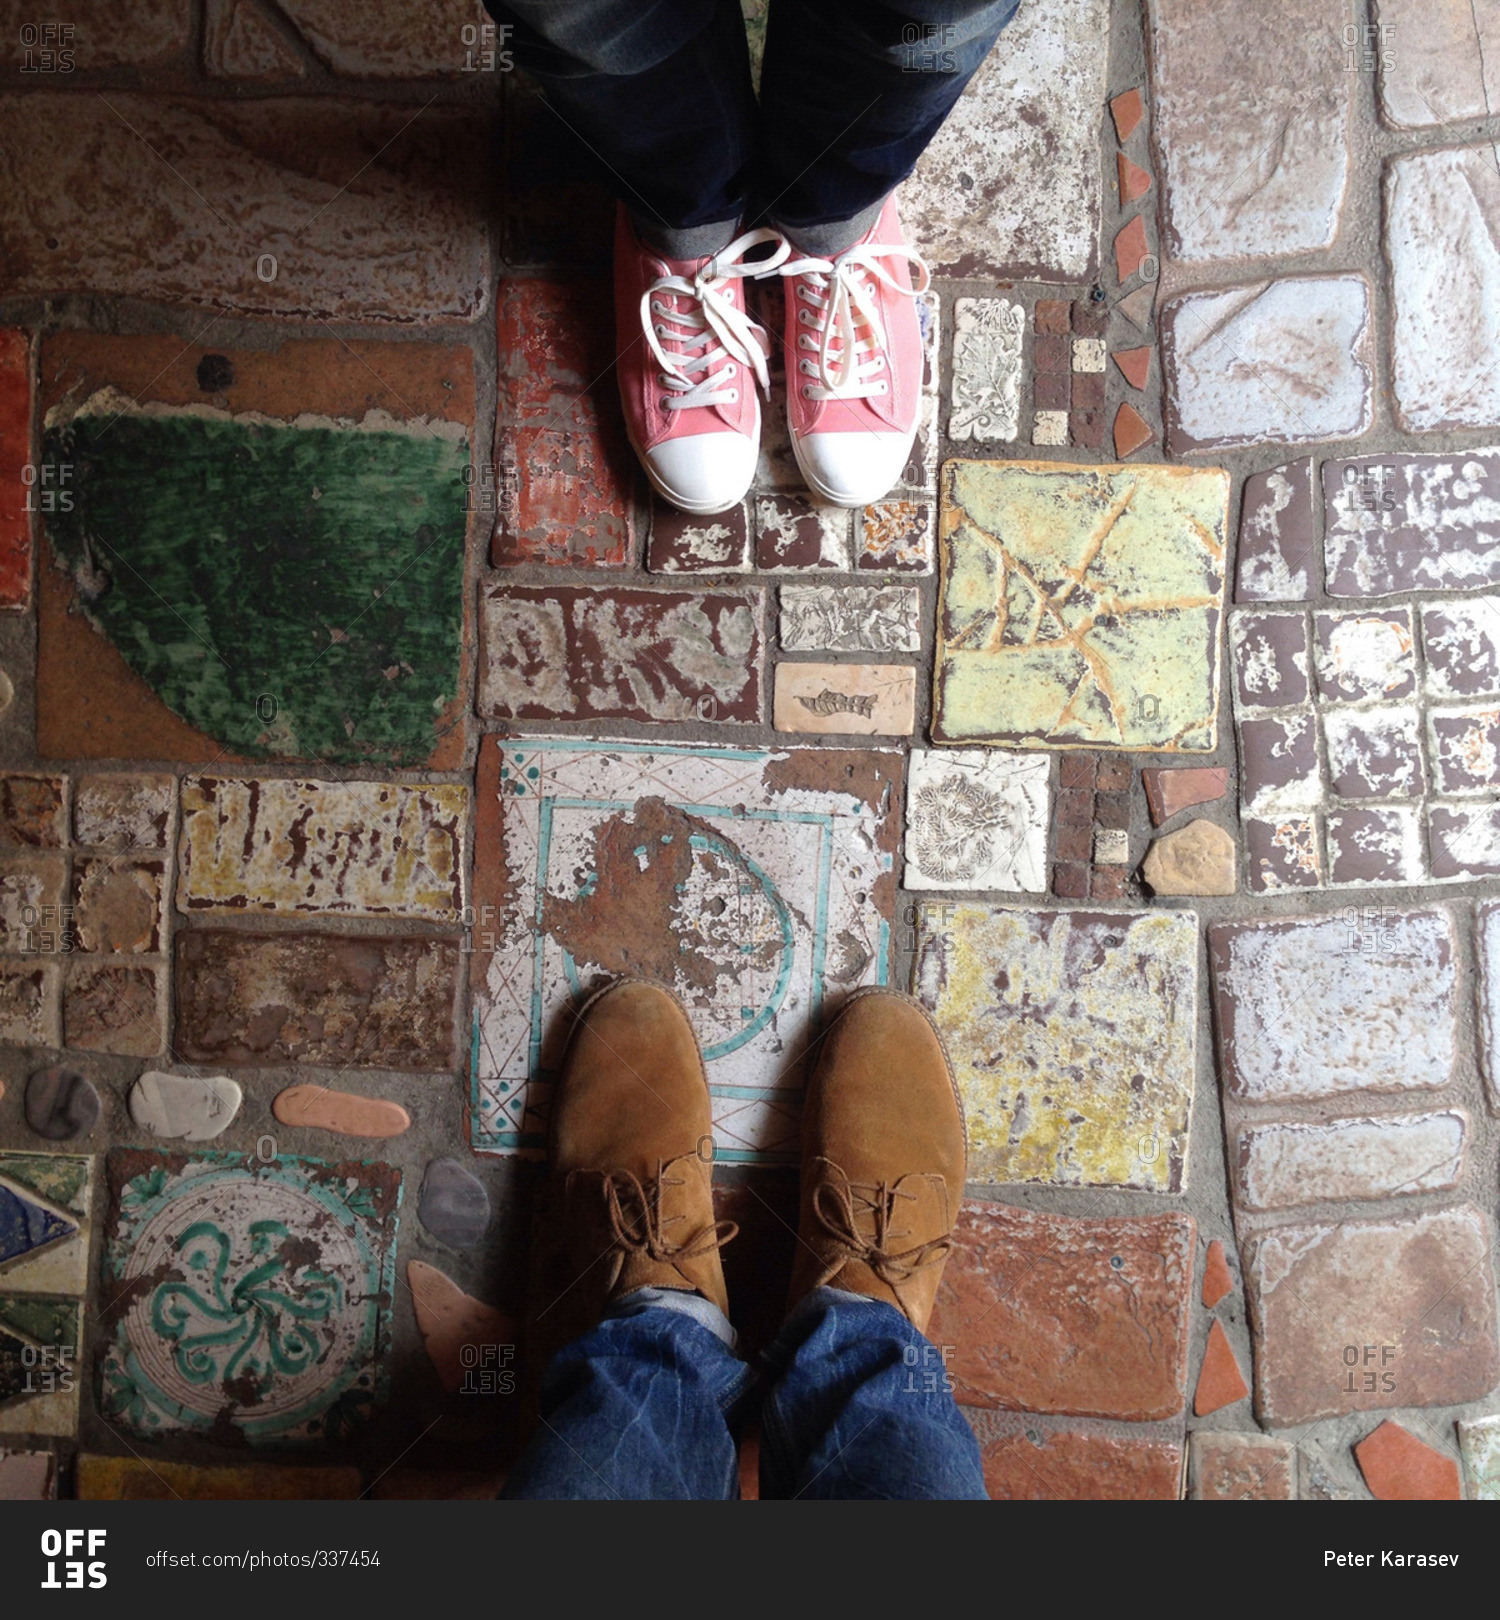 Overhead view of two pairs of shoes on a colorful tile floor